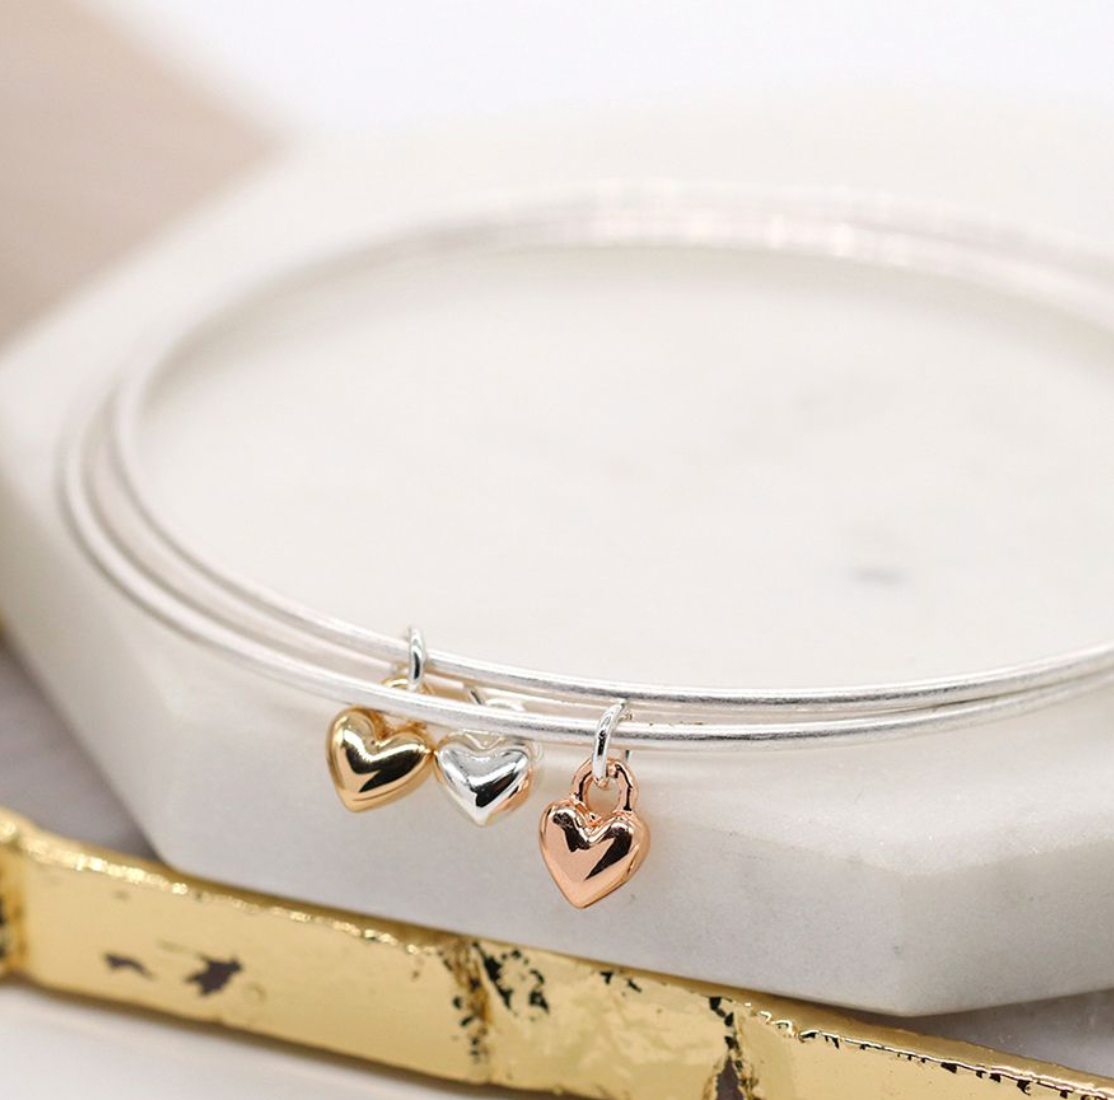 Silver plated triple fine bangle set with mixed metallic hearts